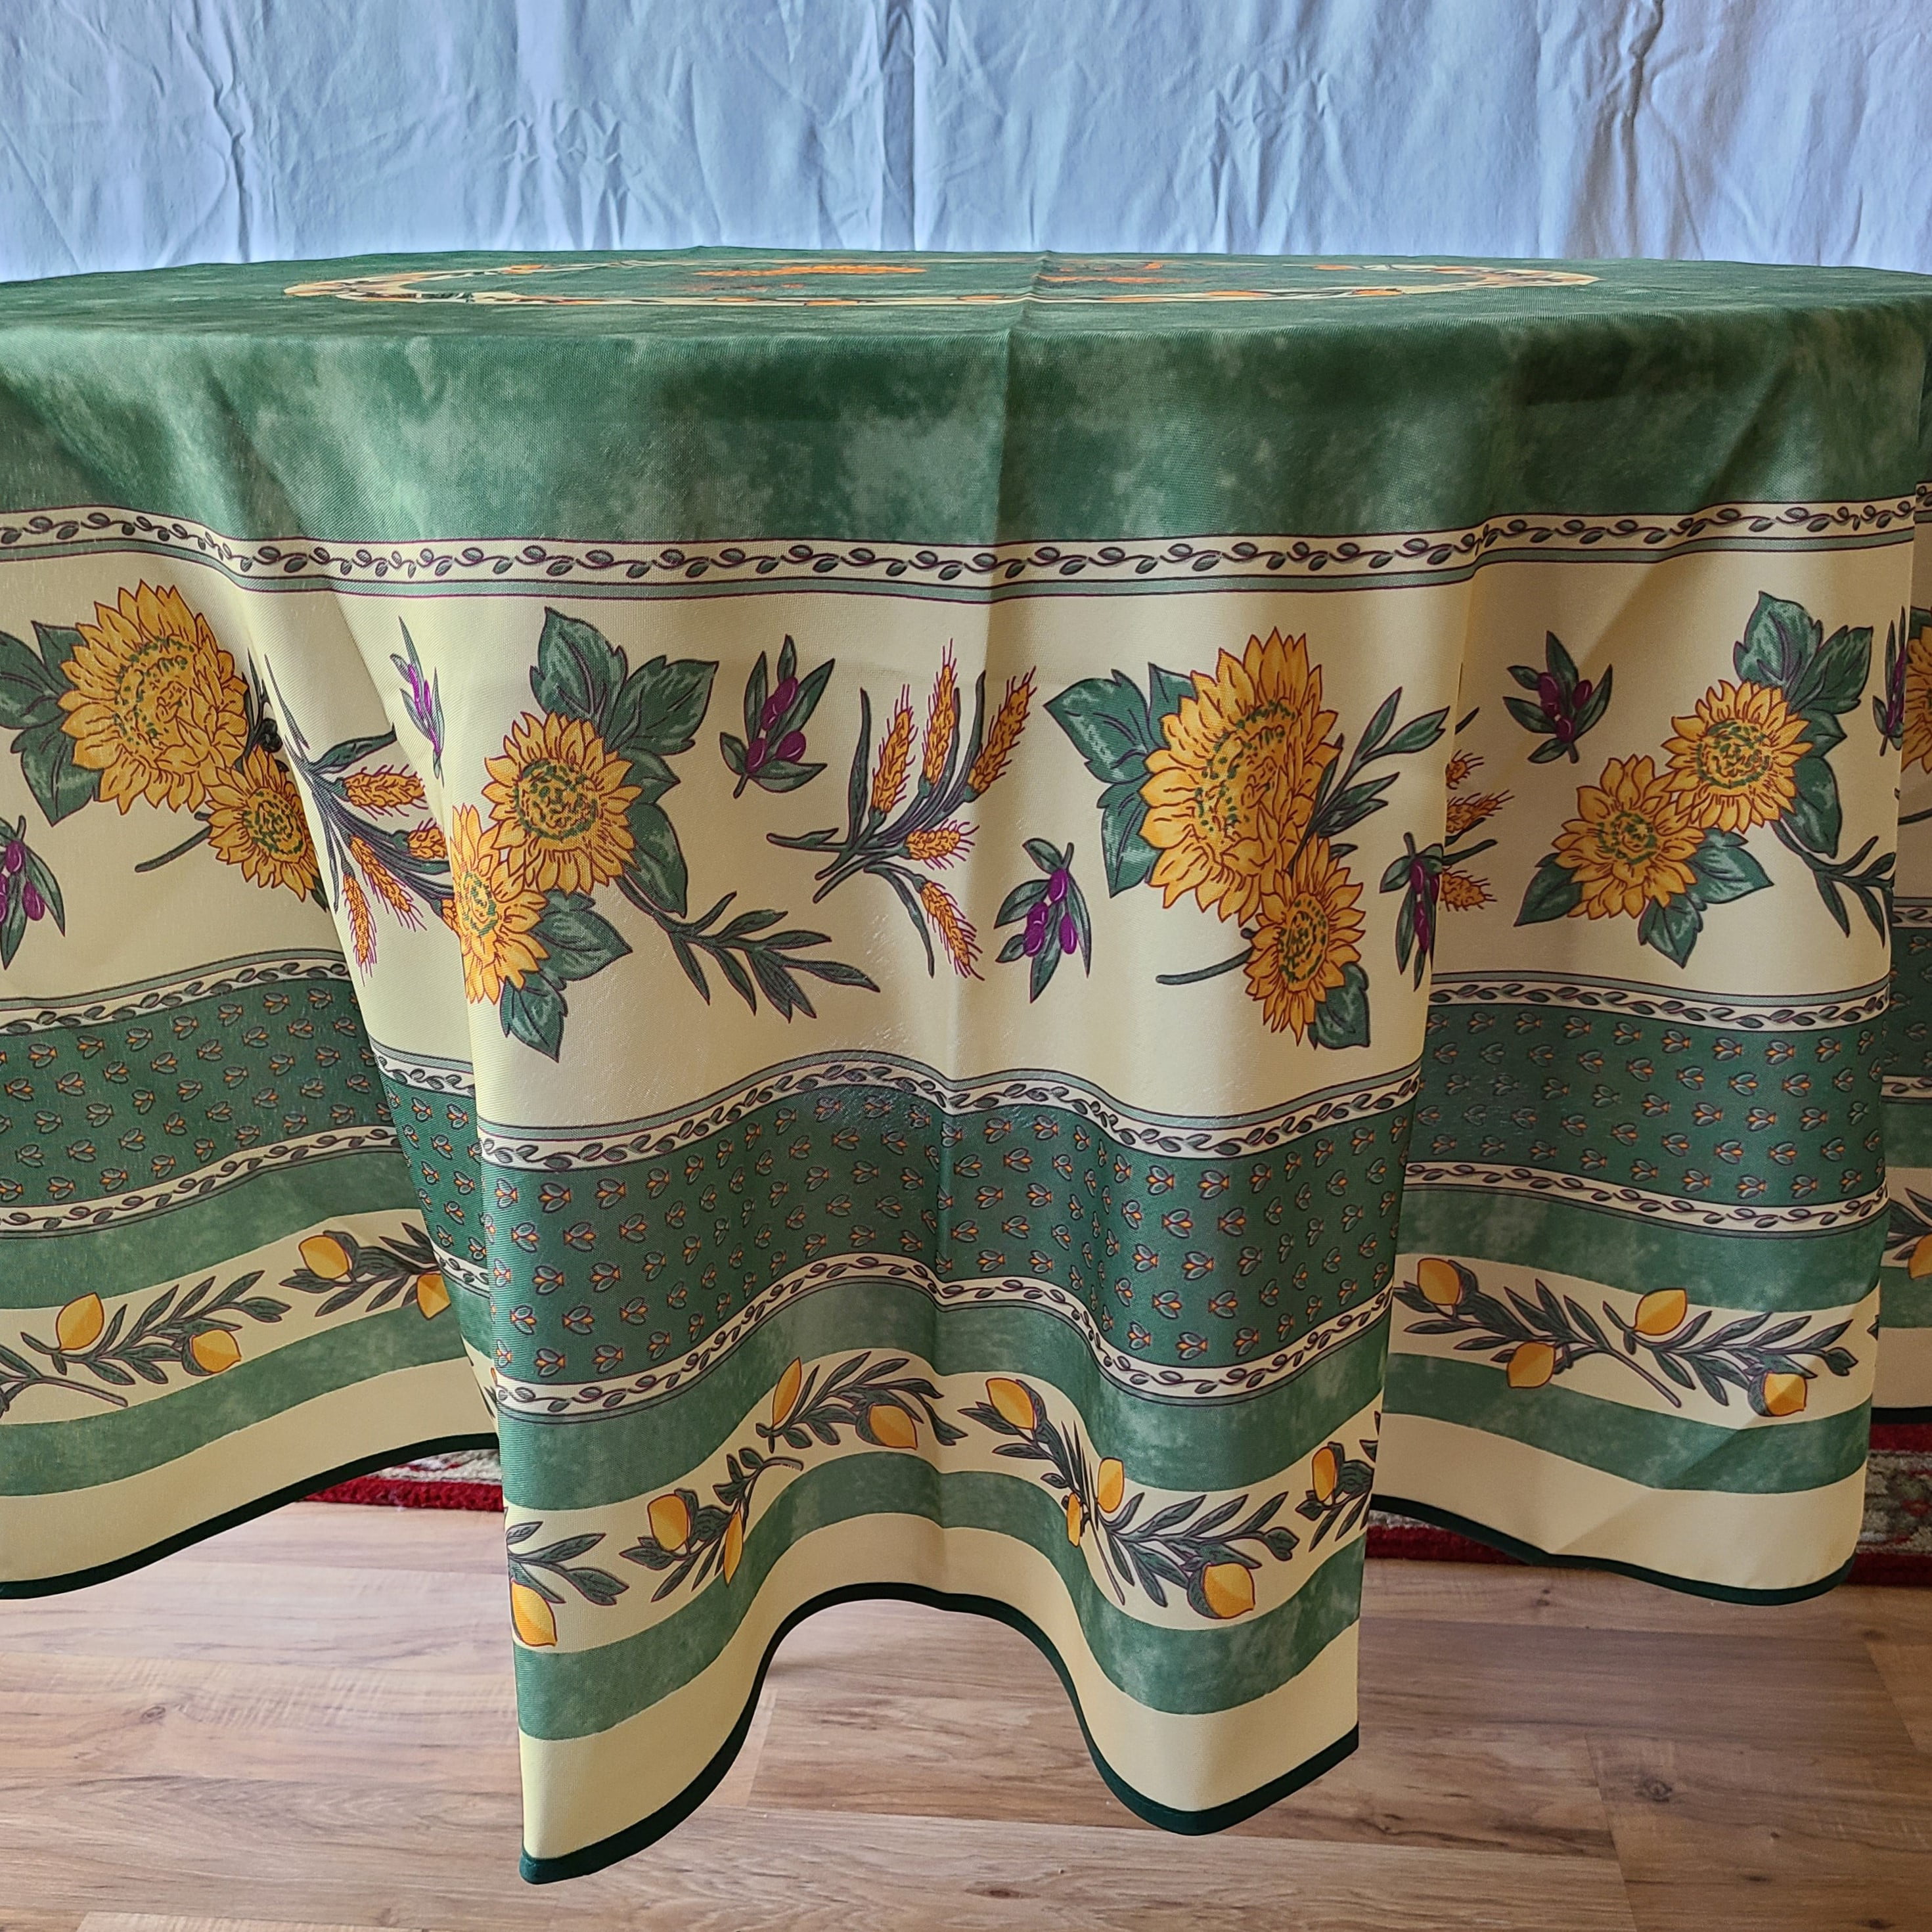 180cm 71" NEW! ROUND SUNFLOWERS OLIVES WHEAT GREEN PROVENCE FRENCH TABLECLOTH 